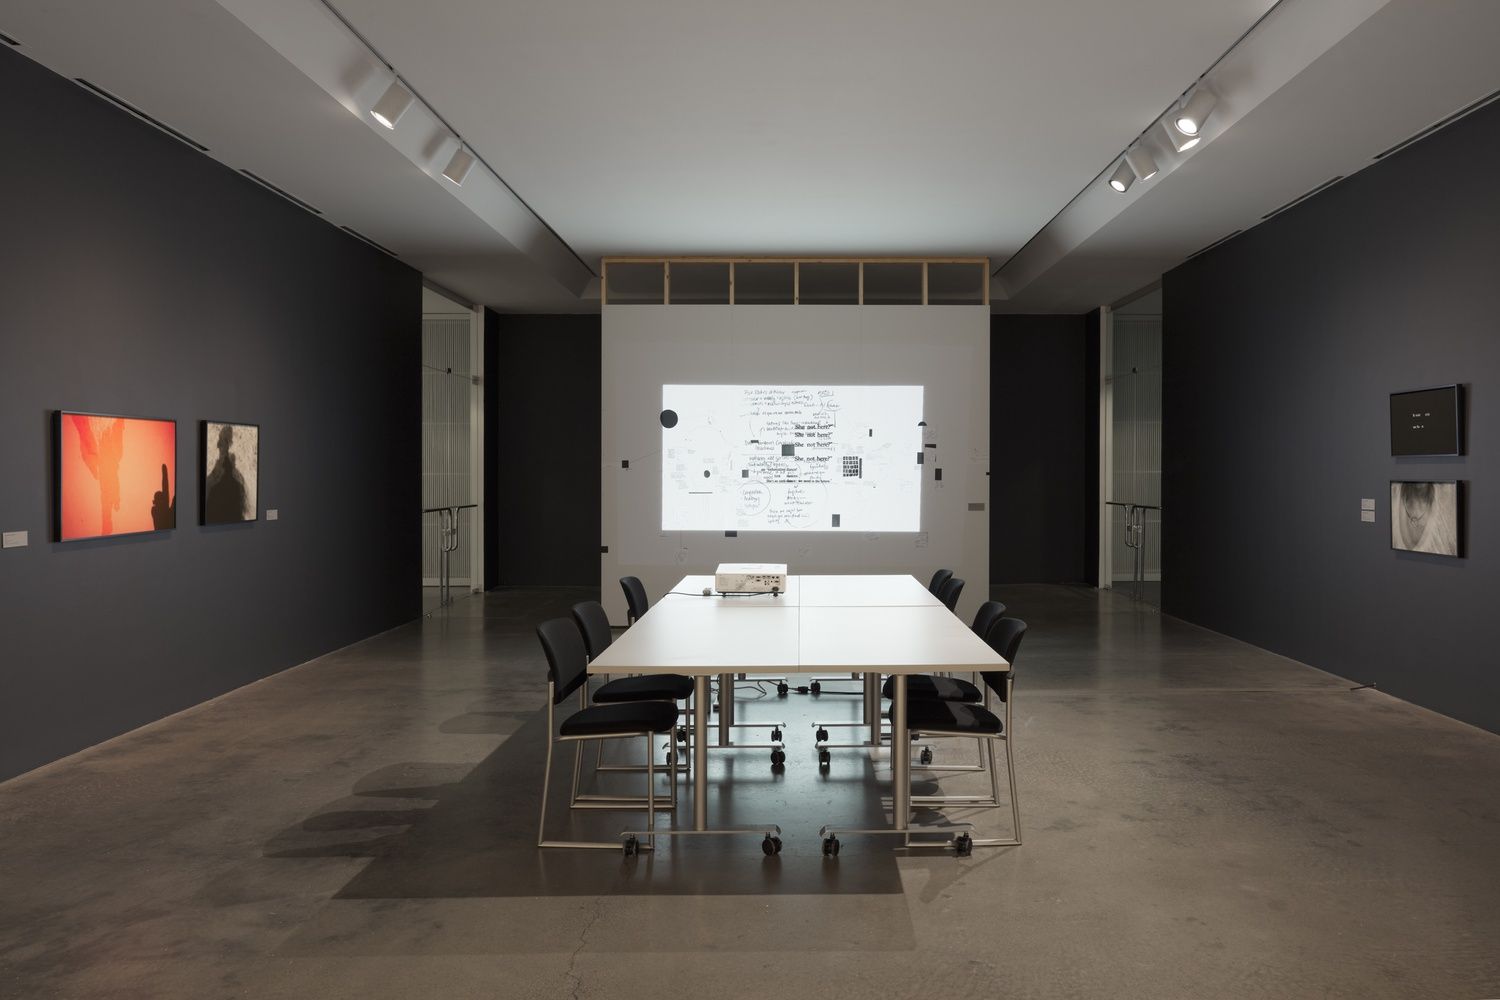 A long room with a projector on a conference table with chairs. It projects a white screen with black notes and geometric shapes. On the walls are prints of shadowy figures in black and white and orange.